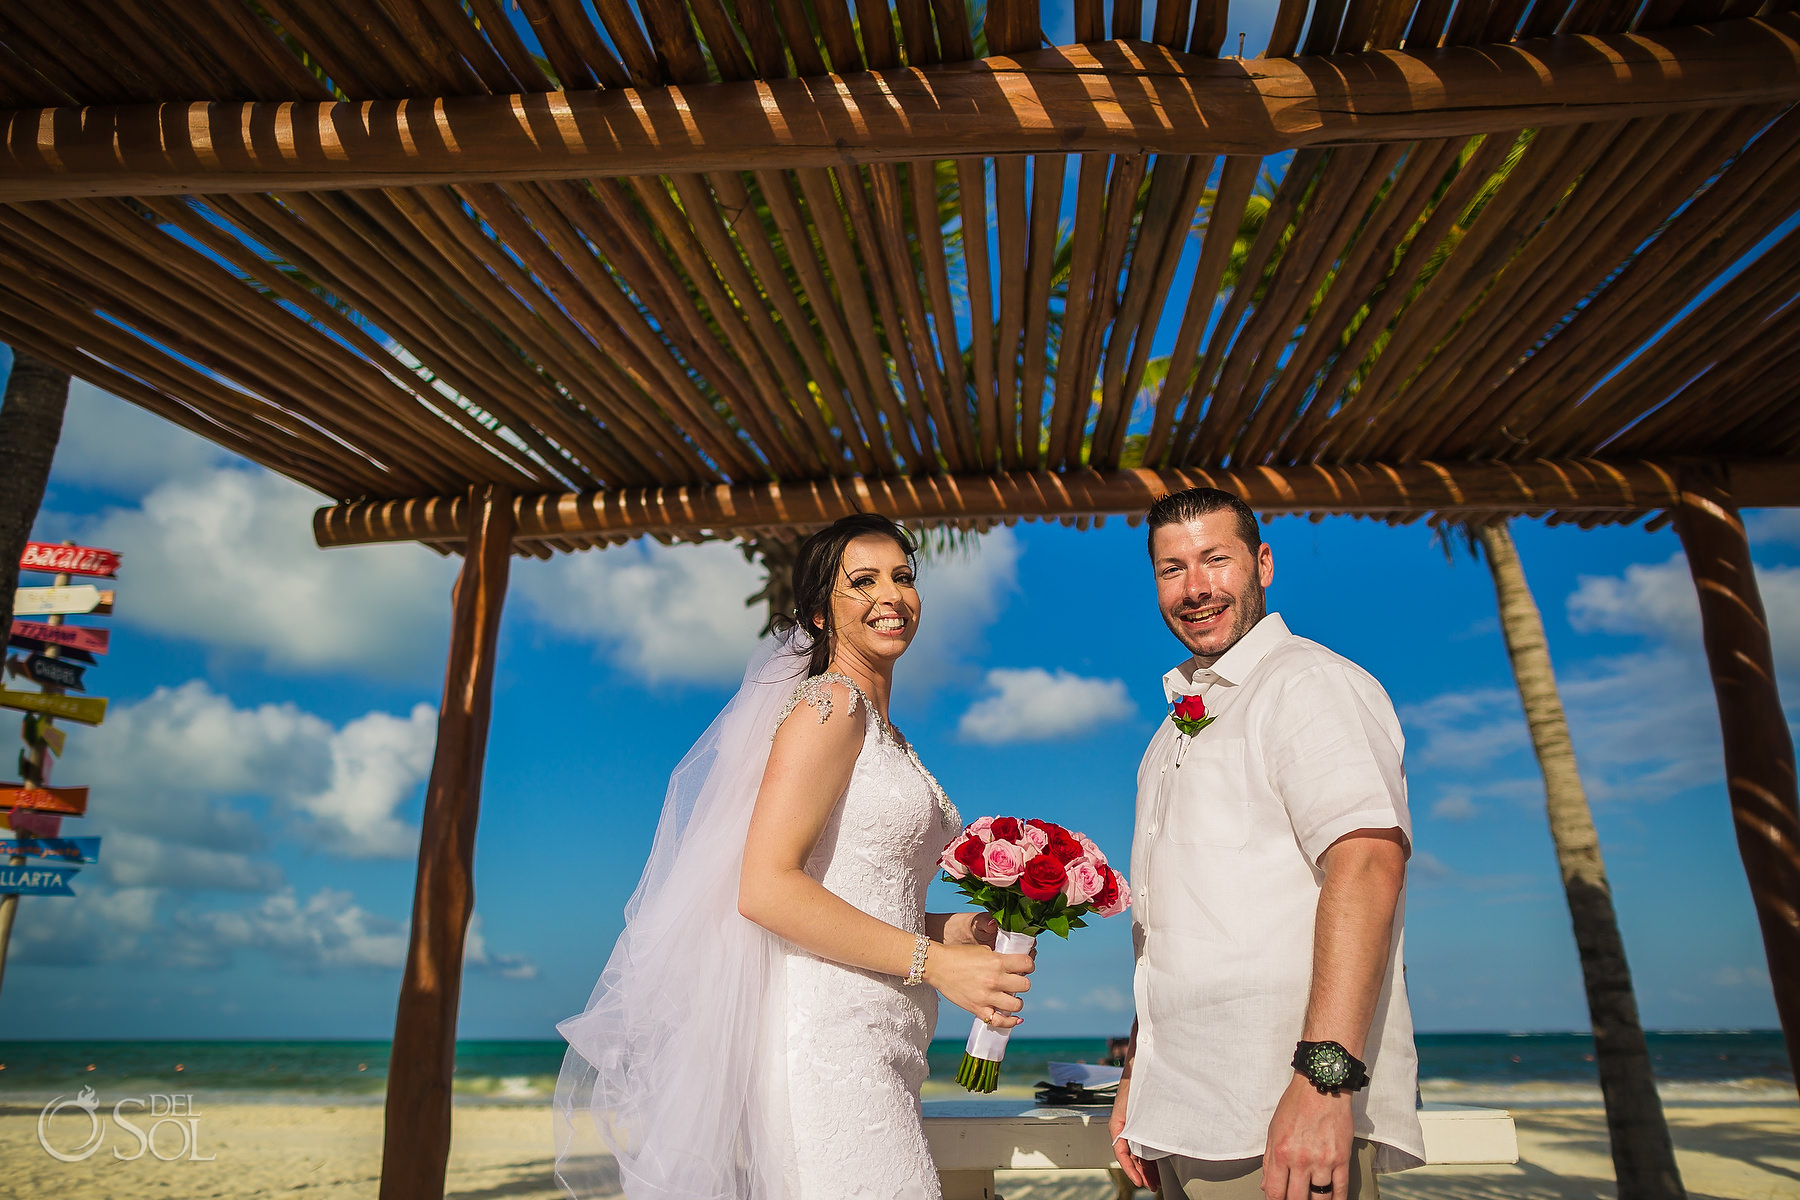 Elope in Mexico the most romantic way to celebrate your love